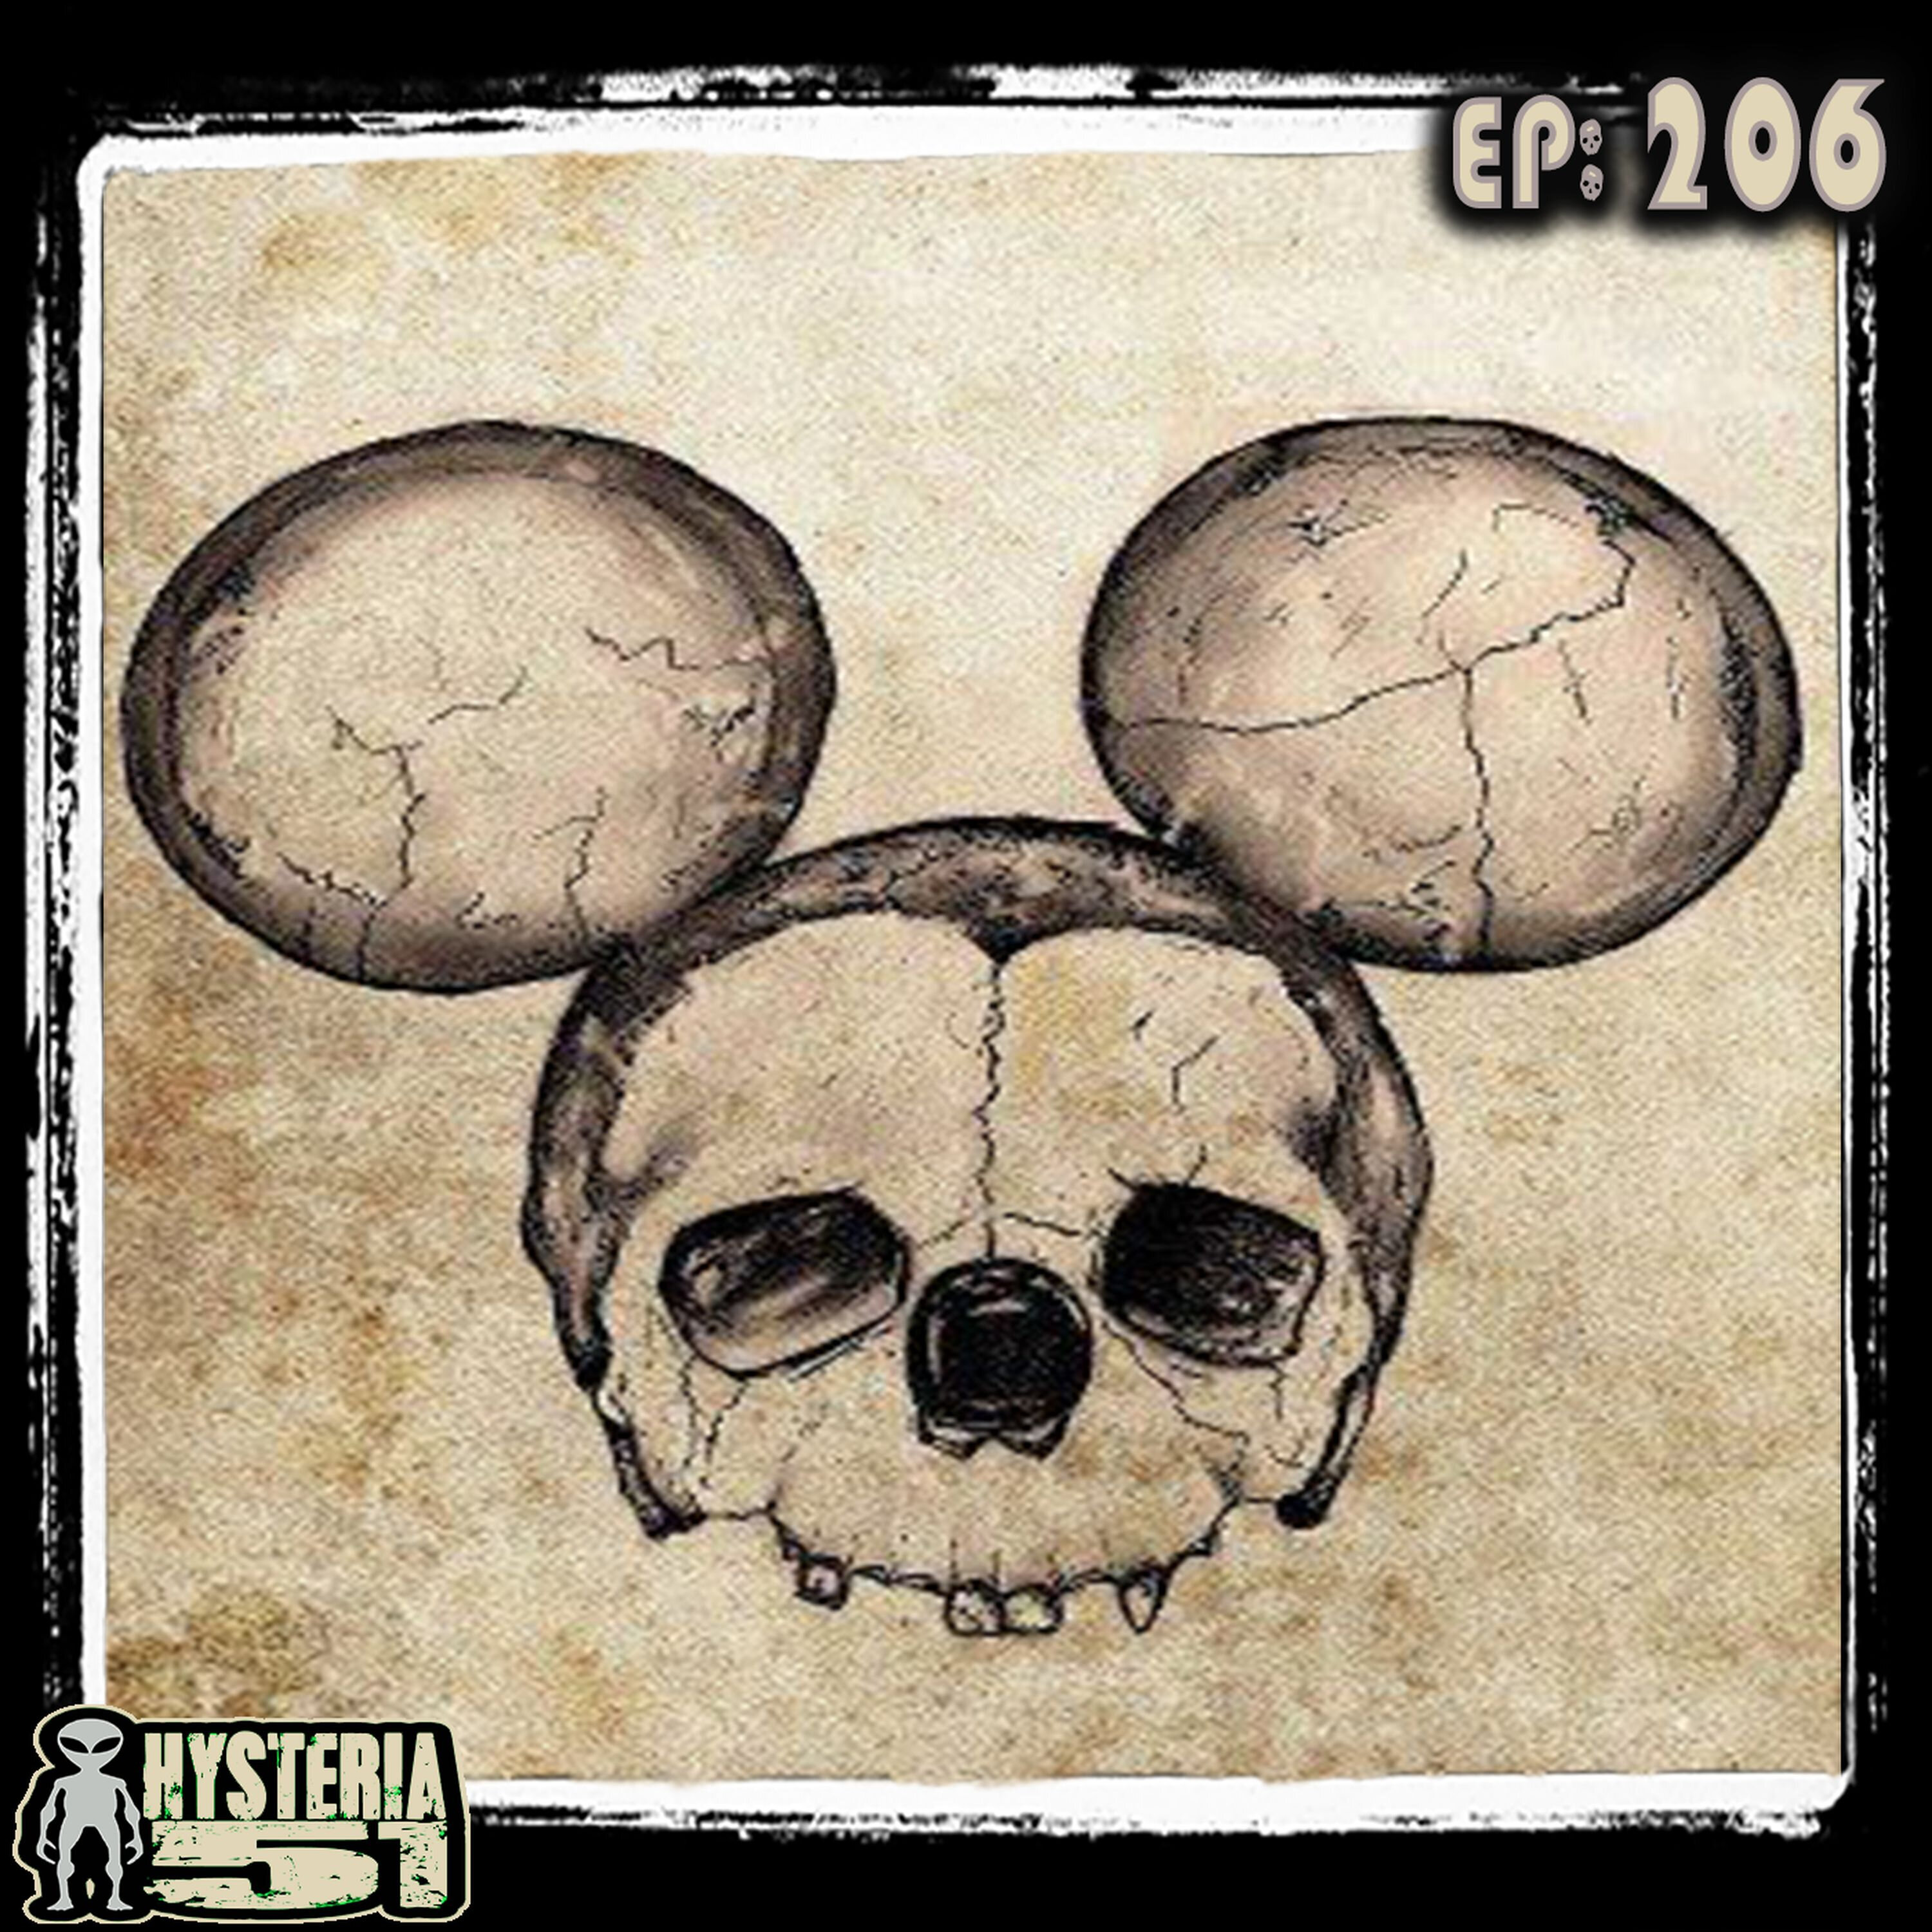 Disney Conspiracies: Secrets from the House of Mouse | 206 Image